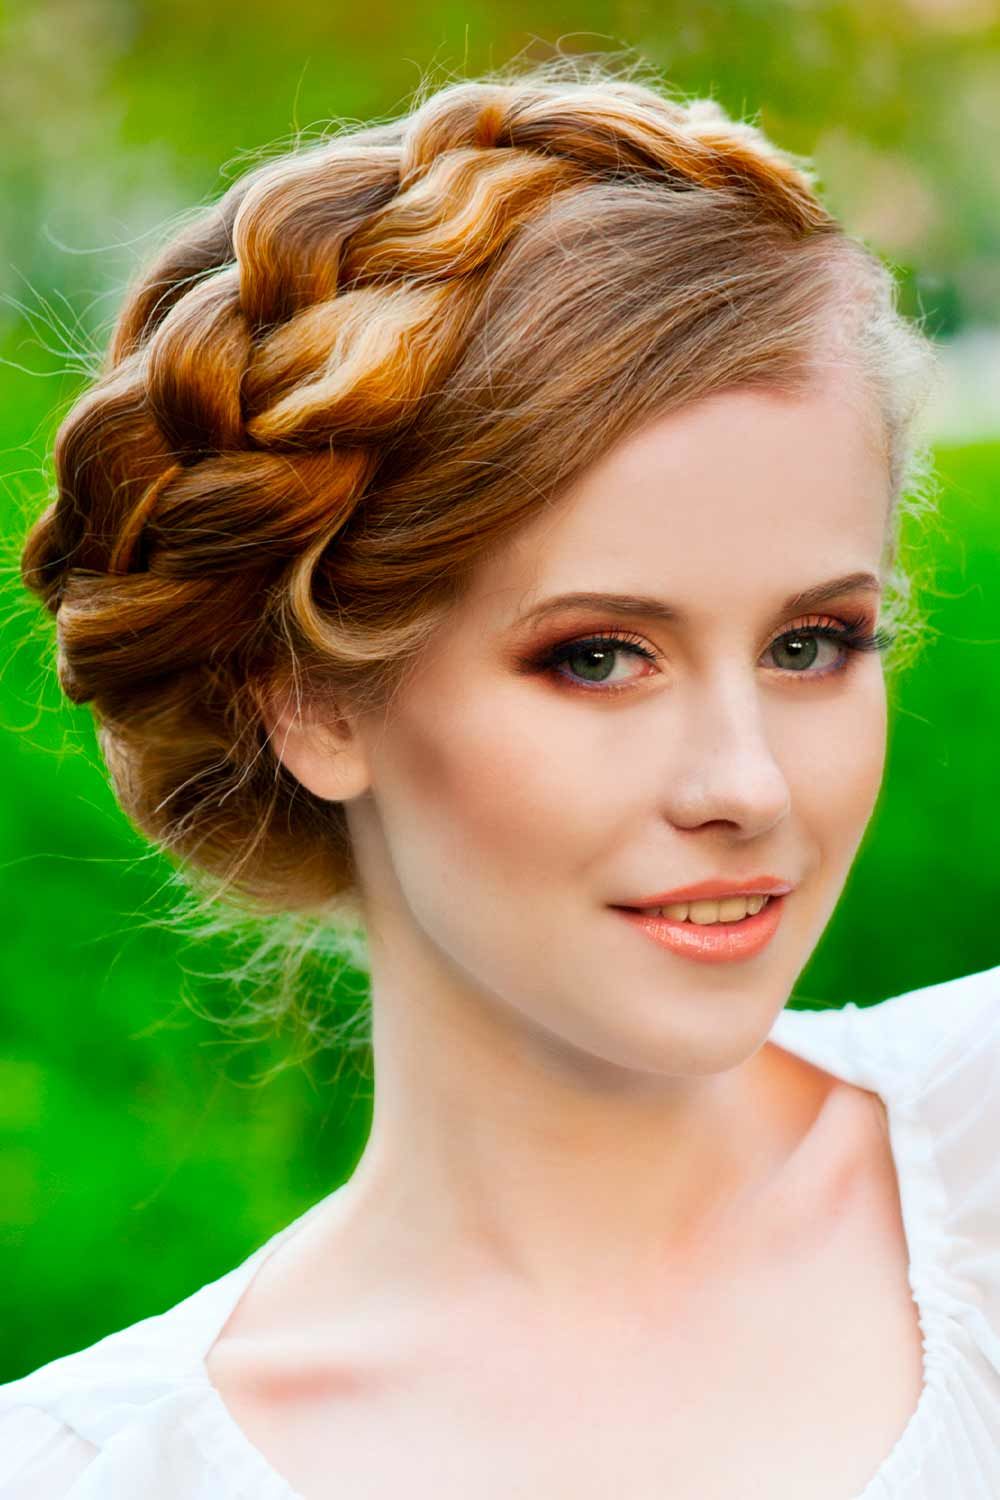 15 Fabulous Halo Braid Ideas To Opt For